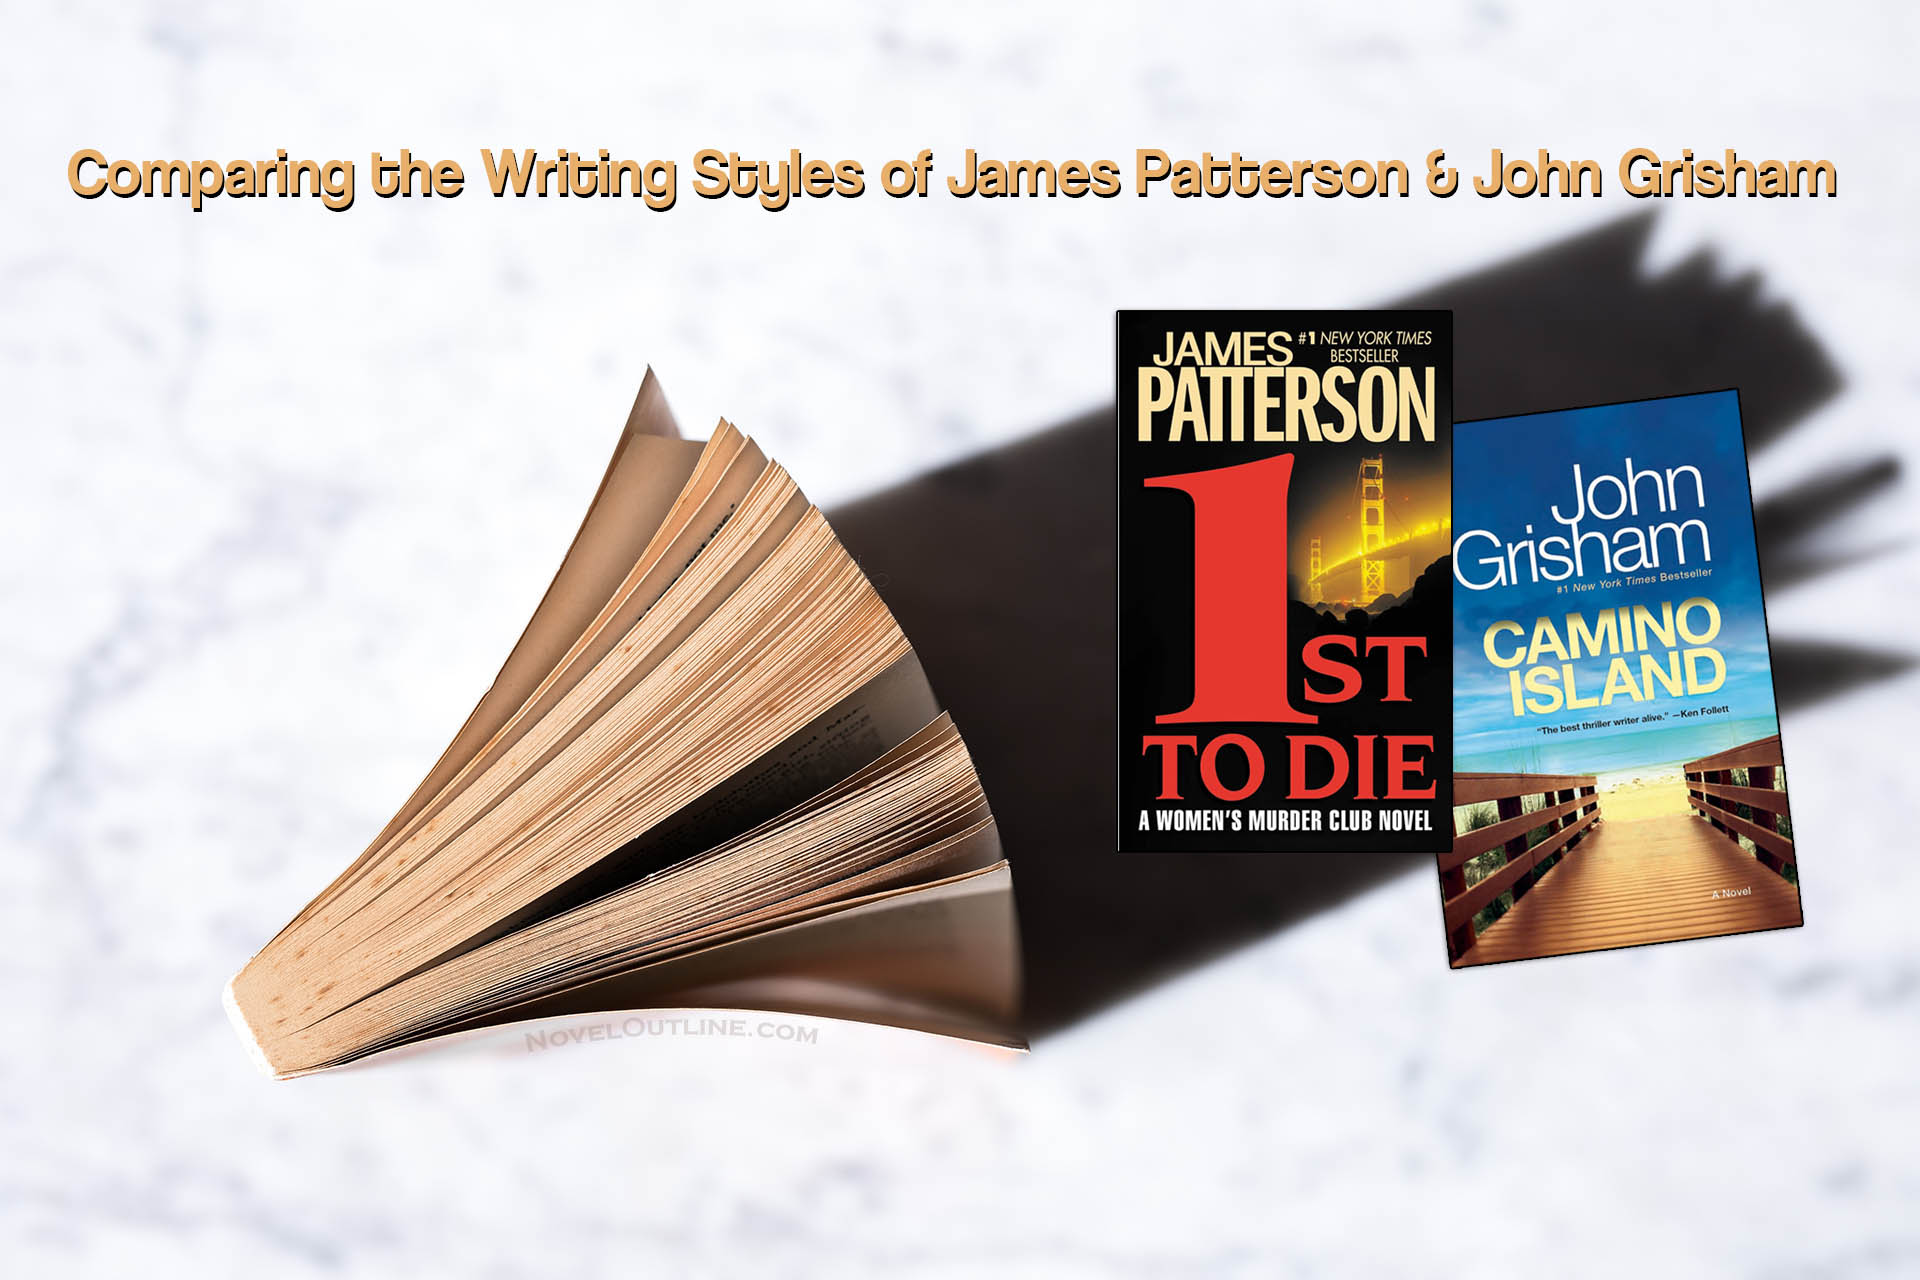 Comparing the Writing Styles of James Patterson and John Grisham